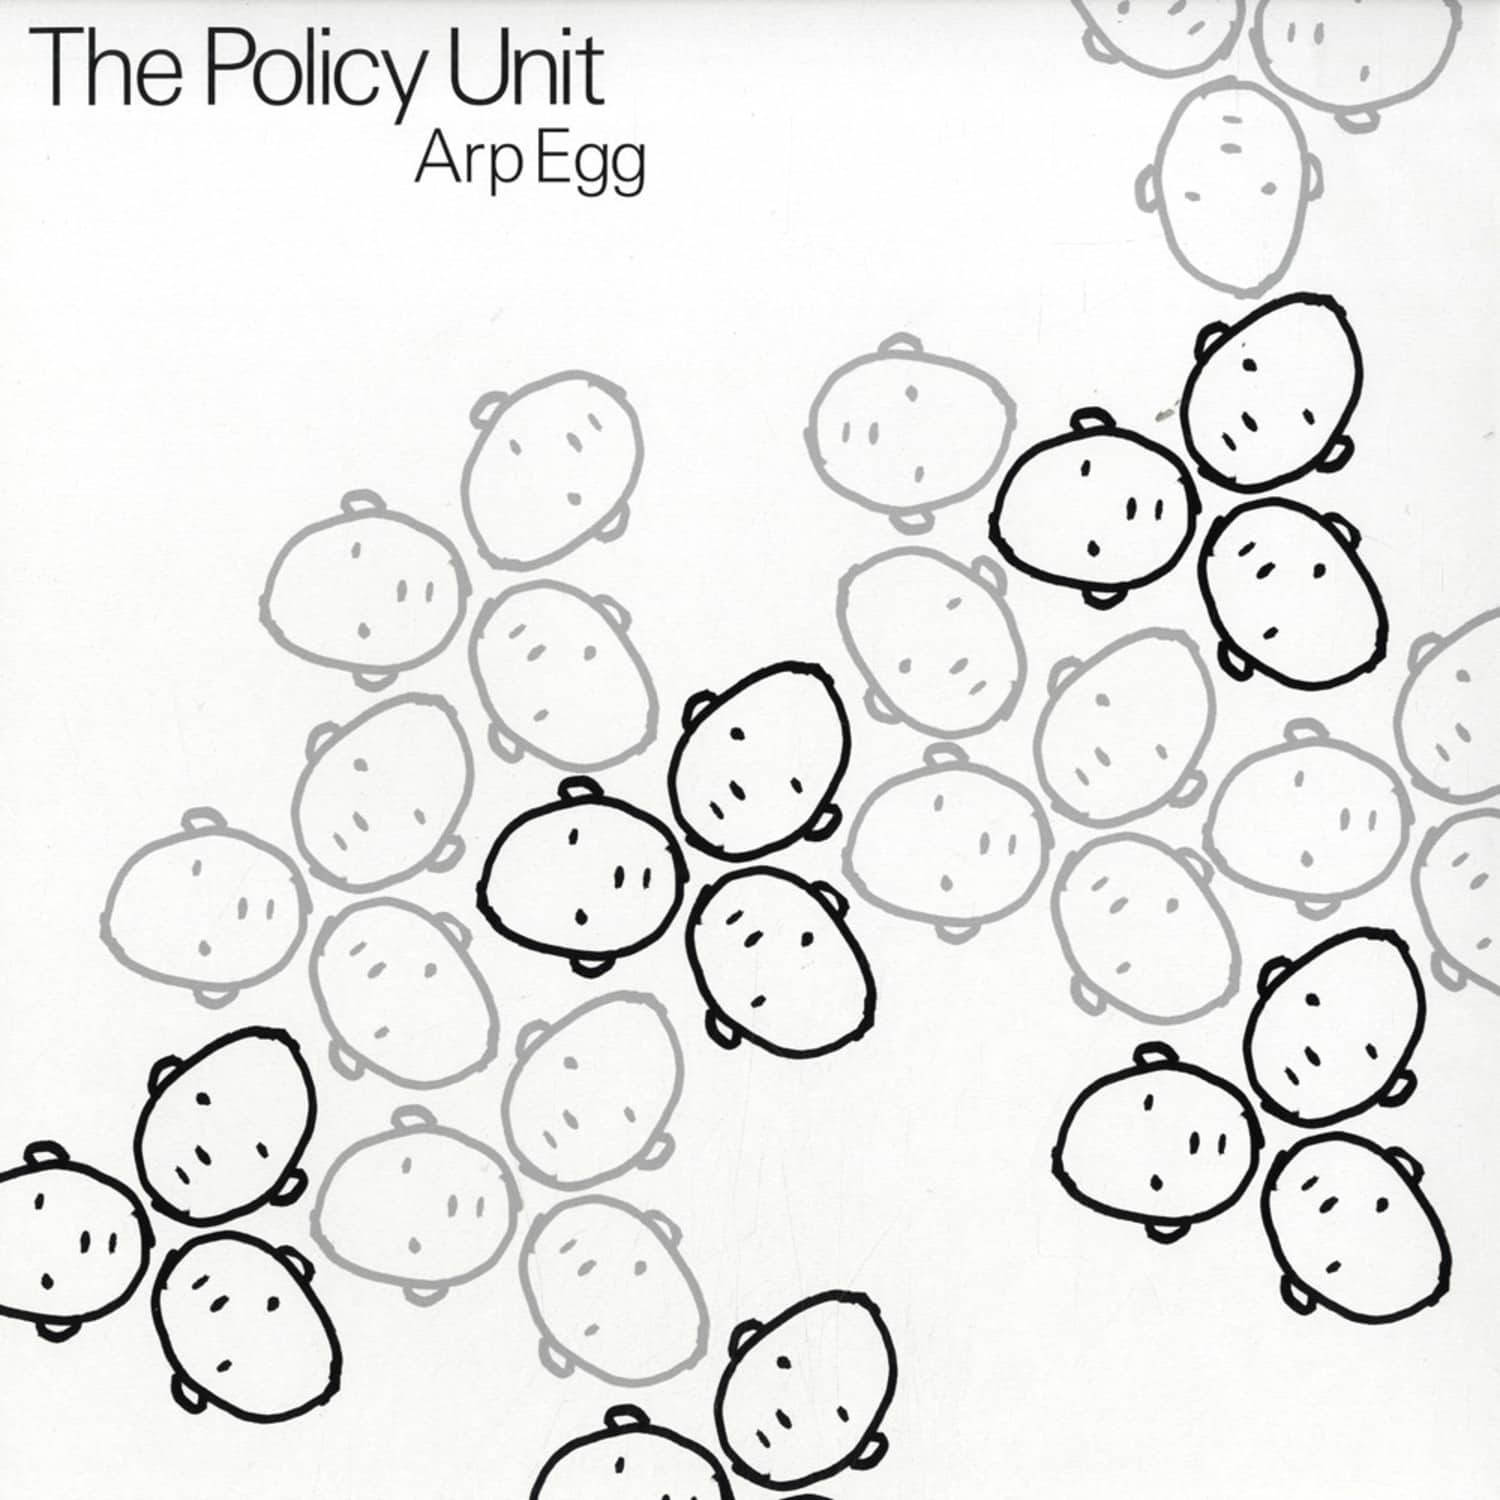 The Policy Unit - ARP EGG